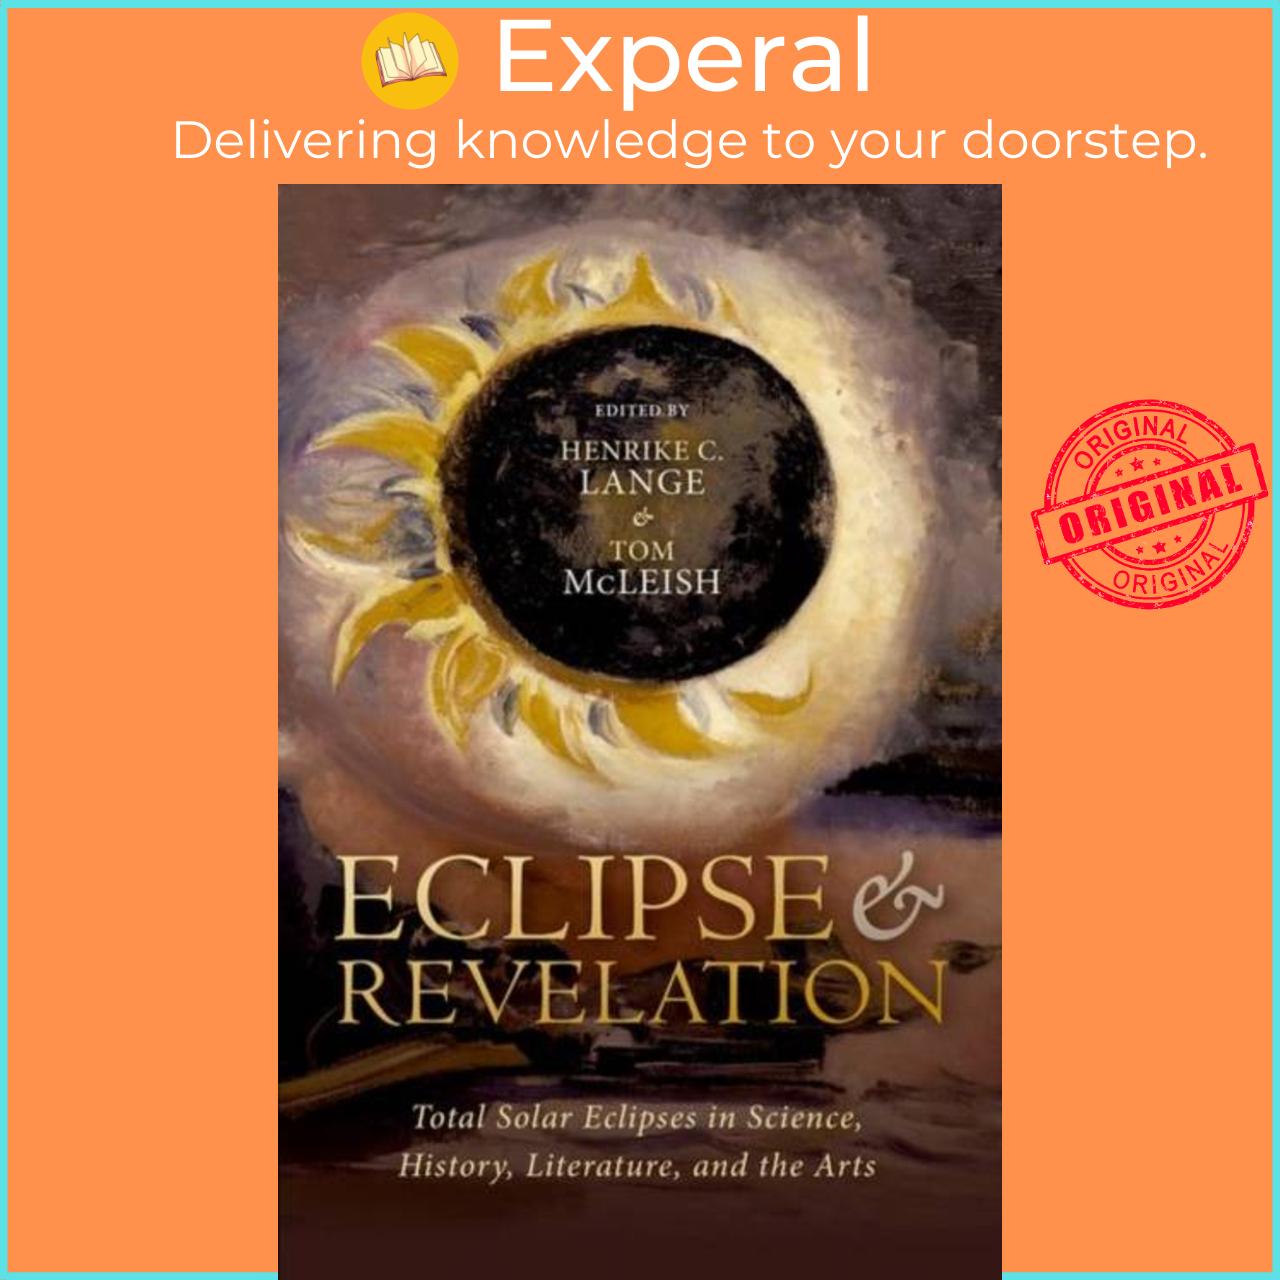 Sách - Eclipse and Revelation - Total Solar Eclipses in Science, History, Literat by Tom McLeish (UK edition, hardcover)